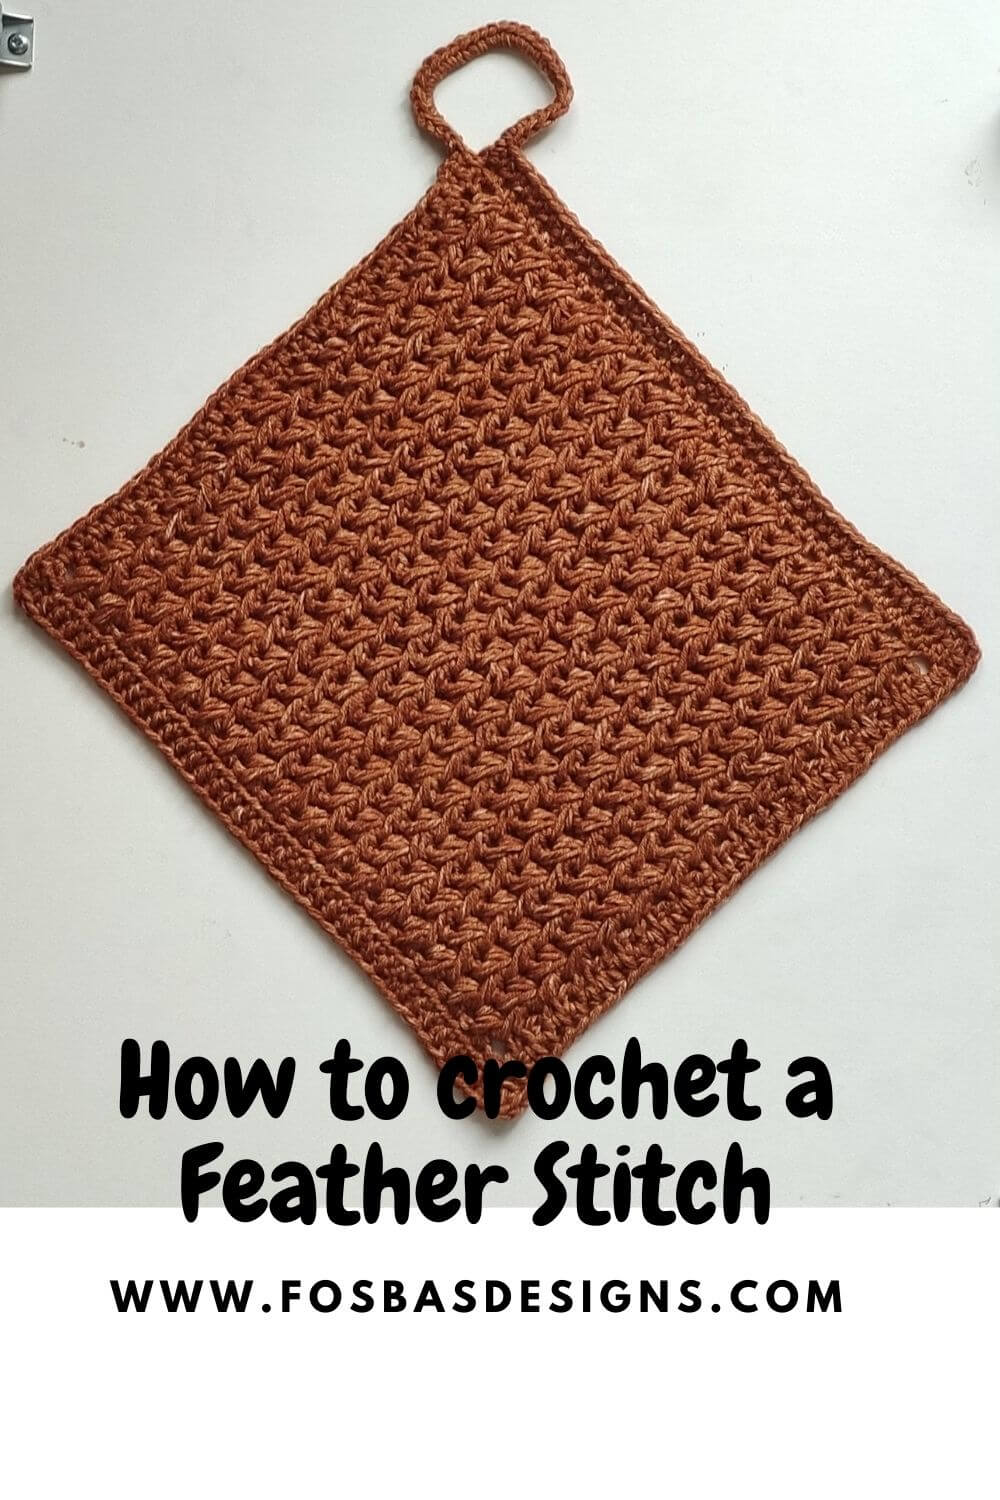 How to crochet feather stitch - Fosbas Designs